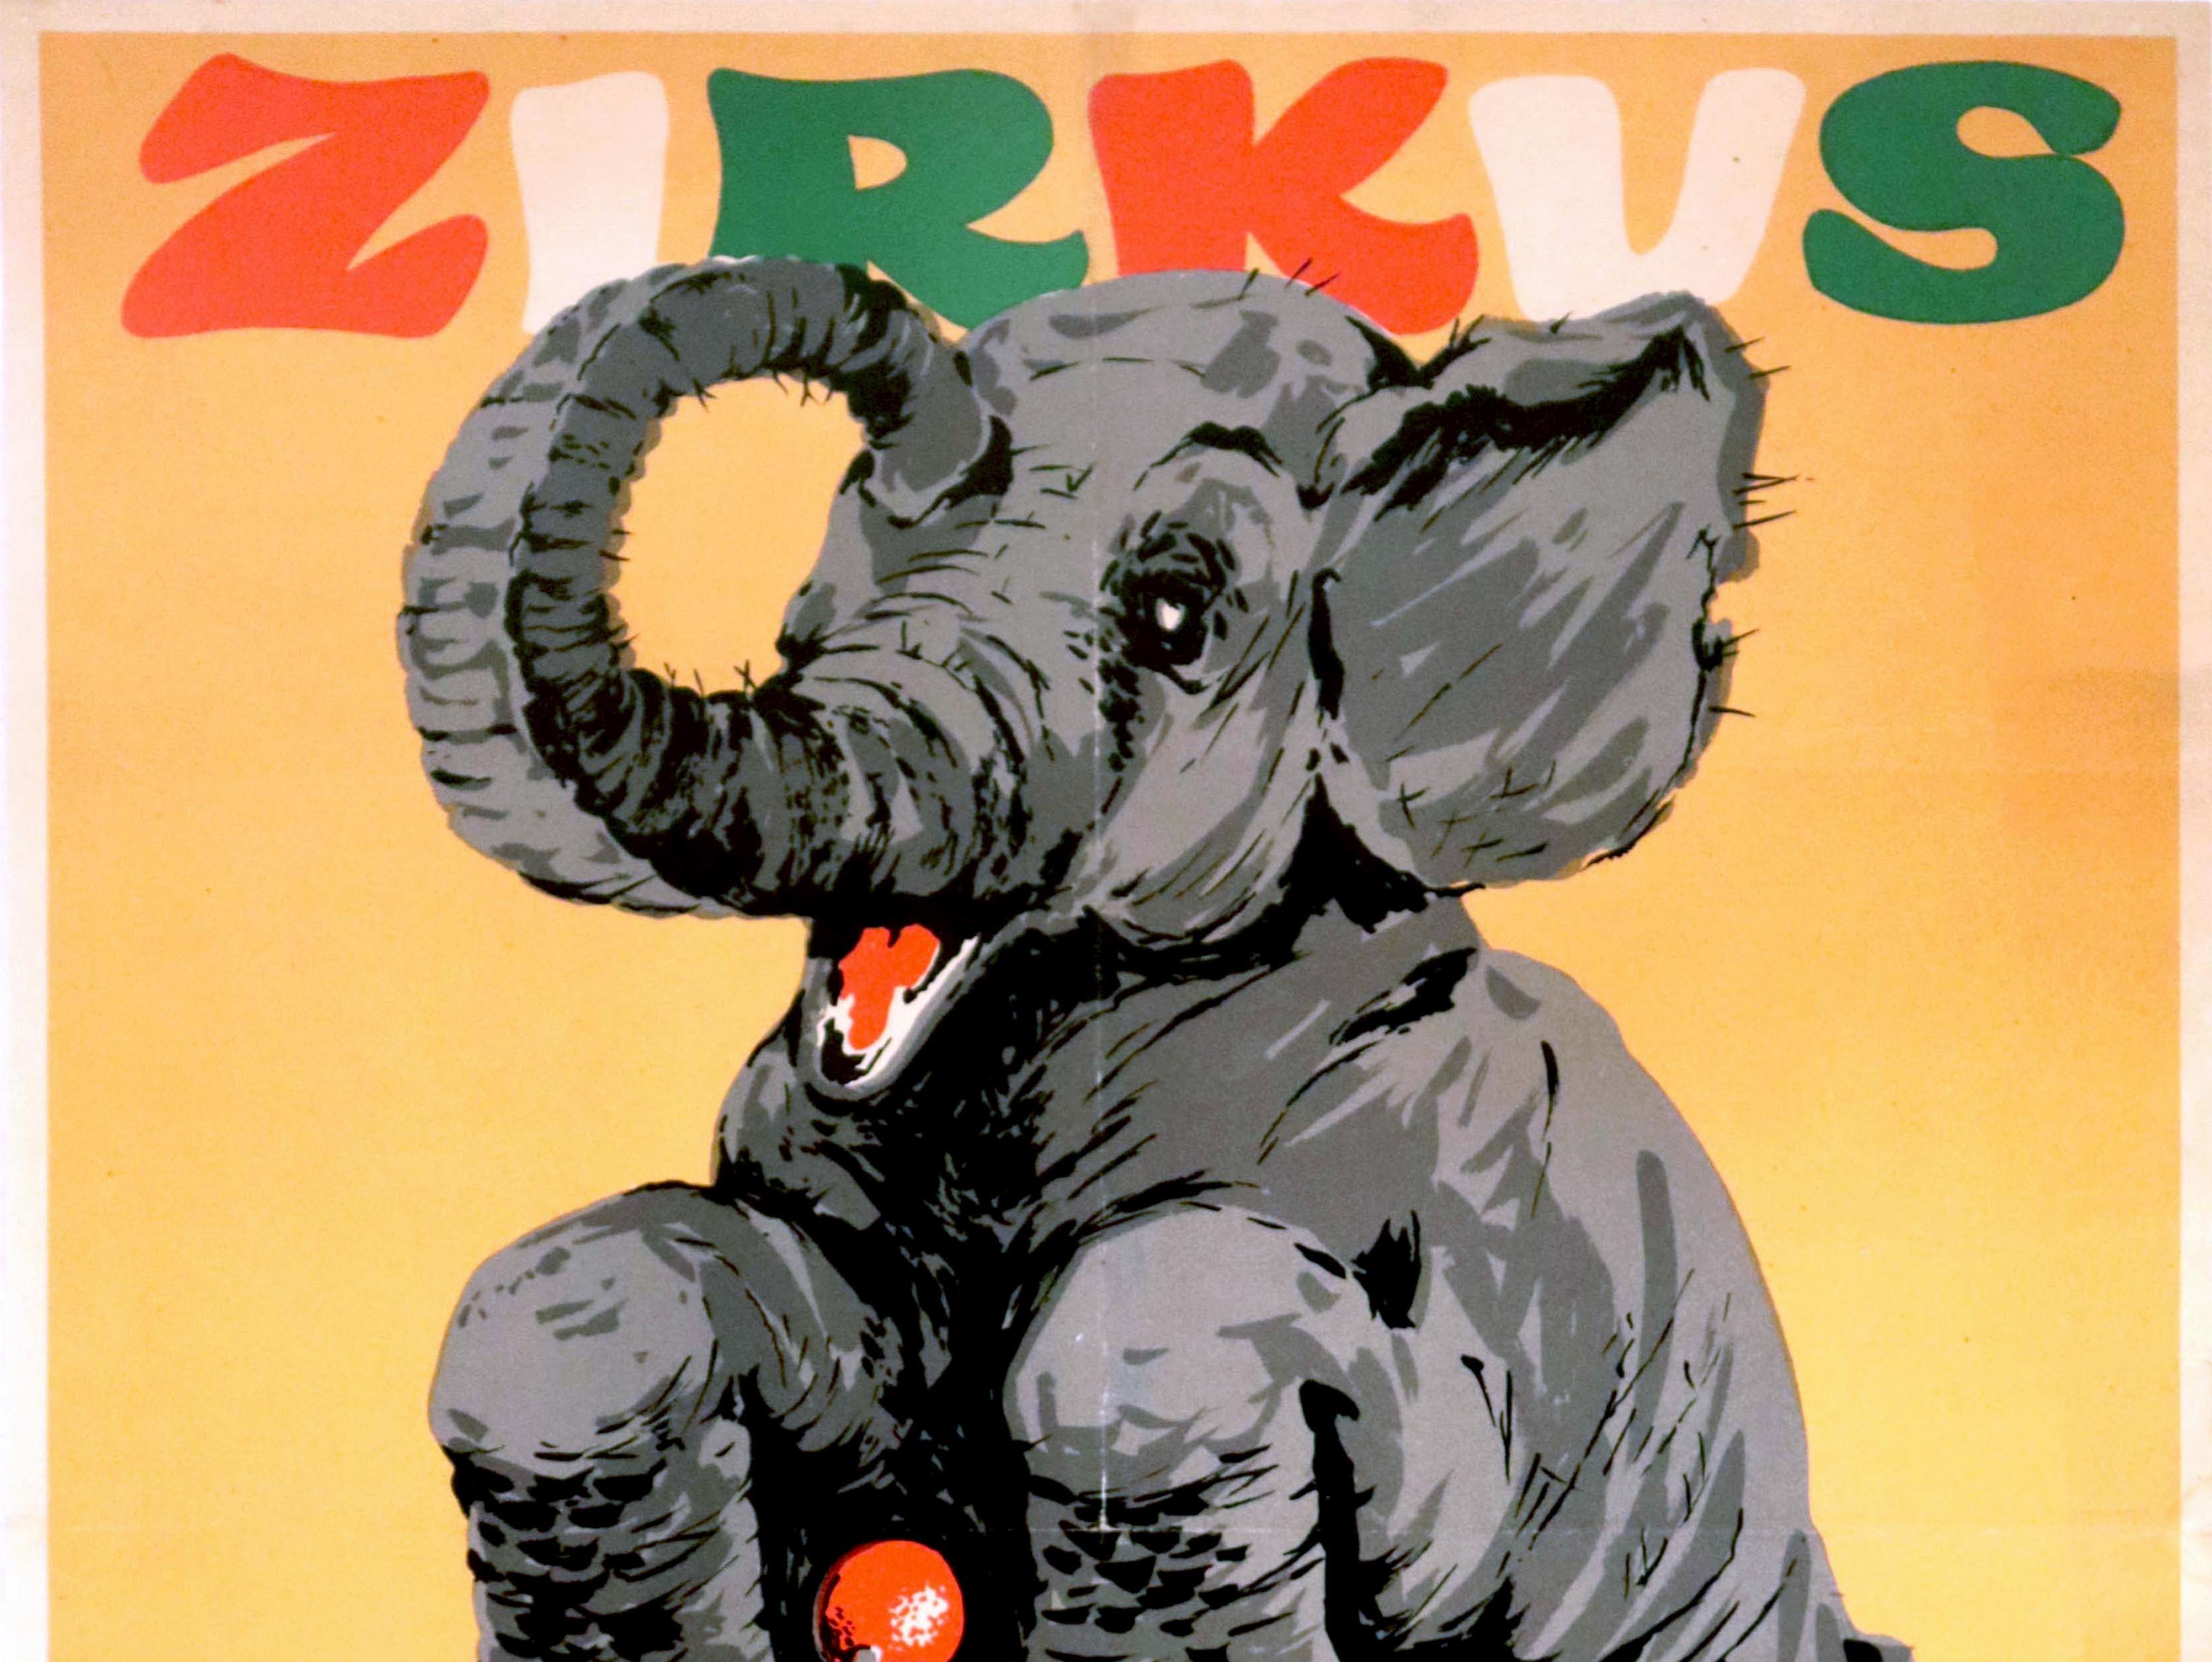 Original vintage advertising poster for a performance by Delhi the cycling elephant at the Zirkus Aeros circus featuring a fun colourful illustration of a grey elephant riding a red tricycle with the bold orange, white and green stylised lettering